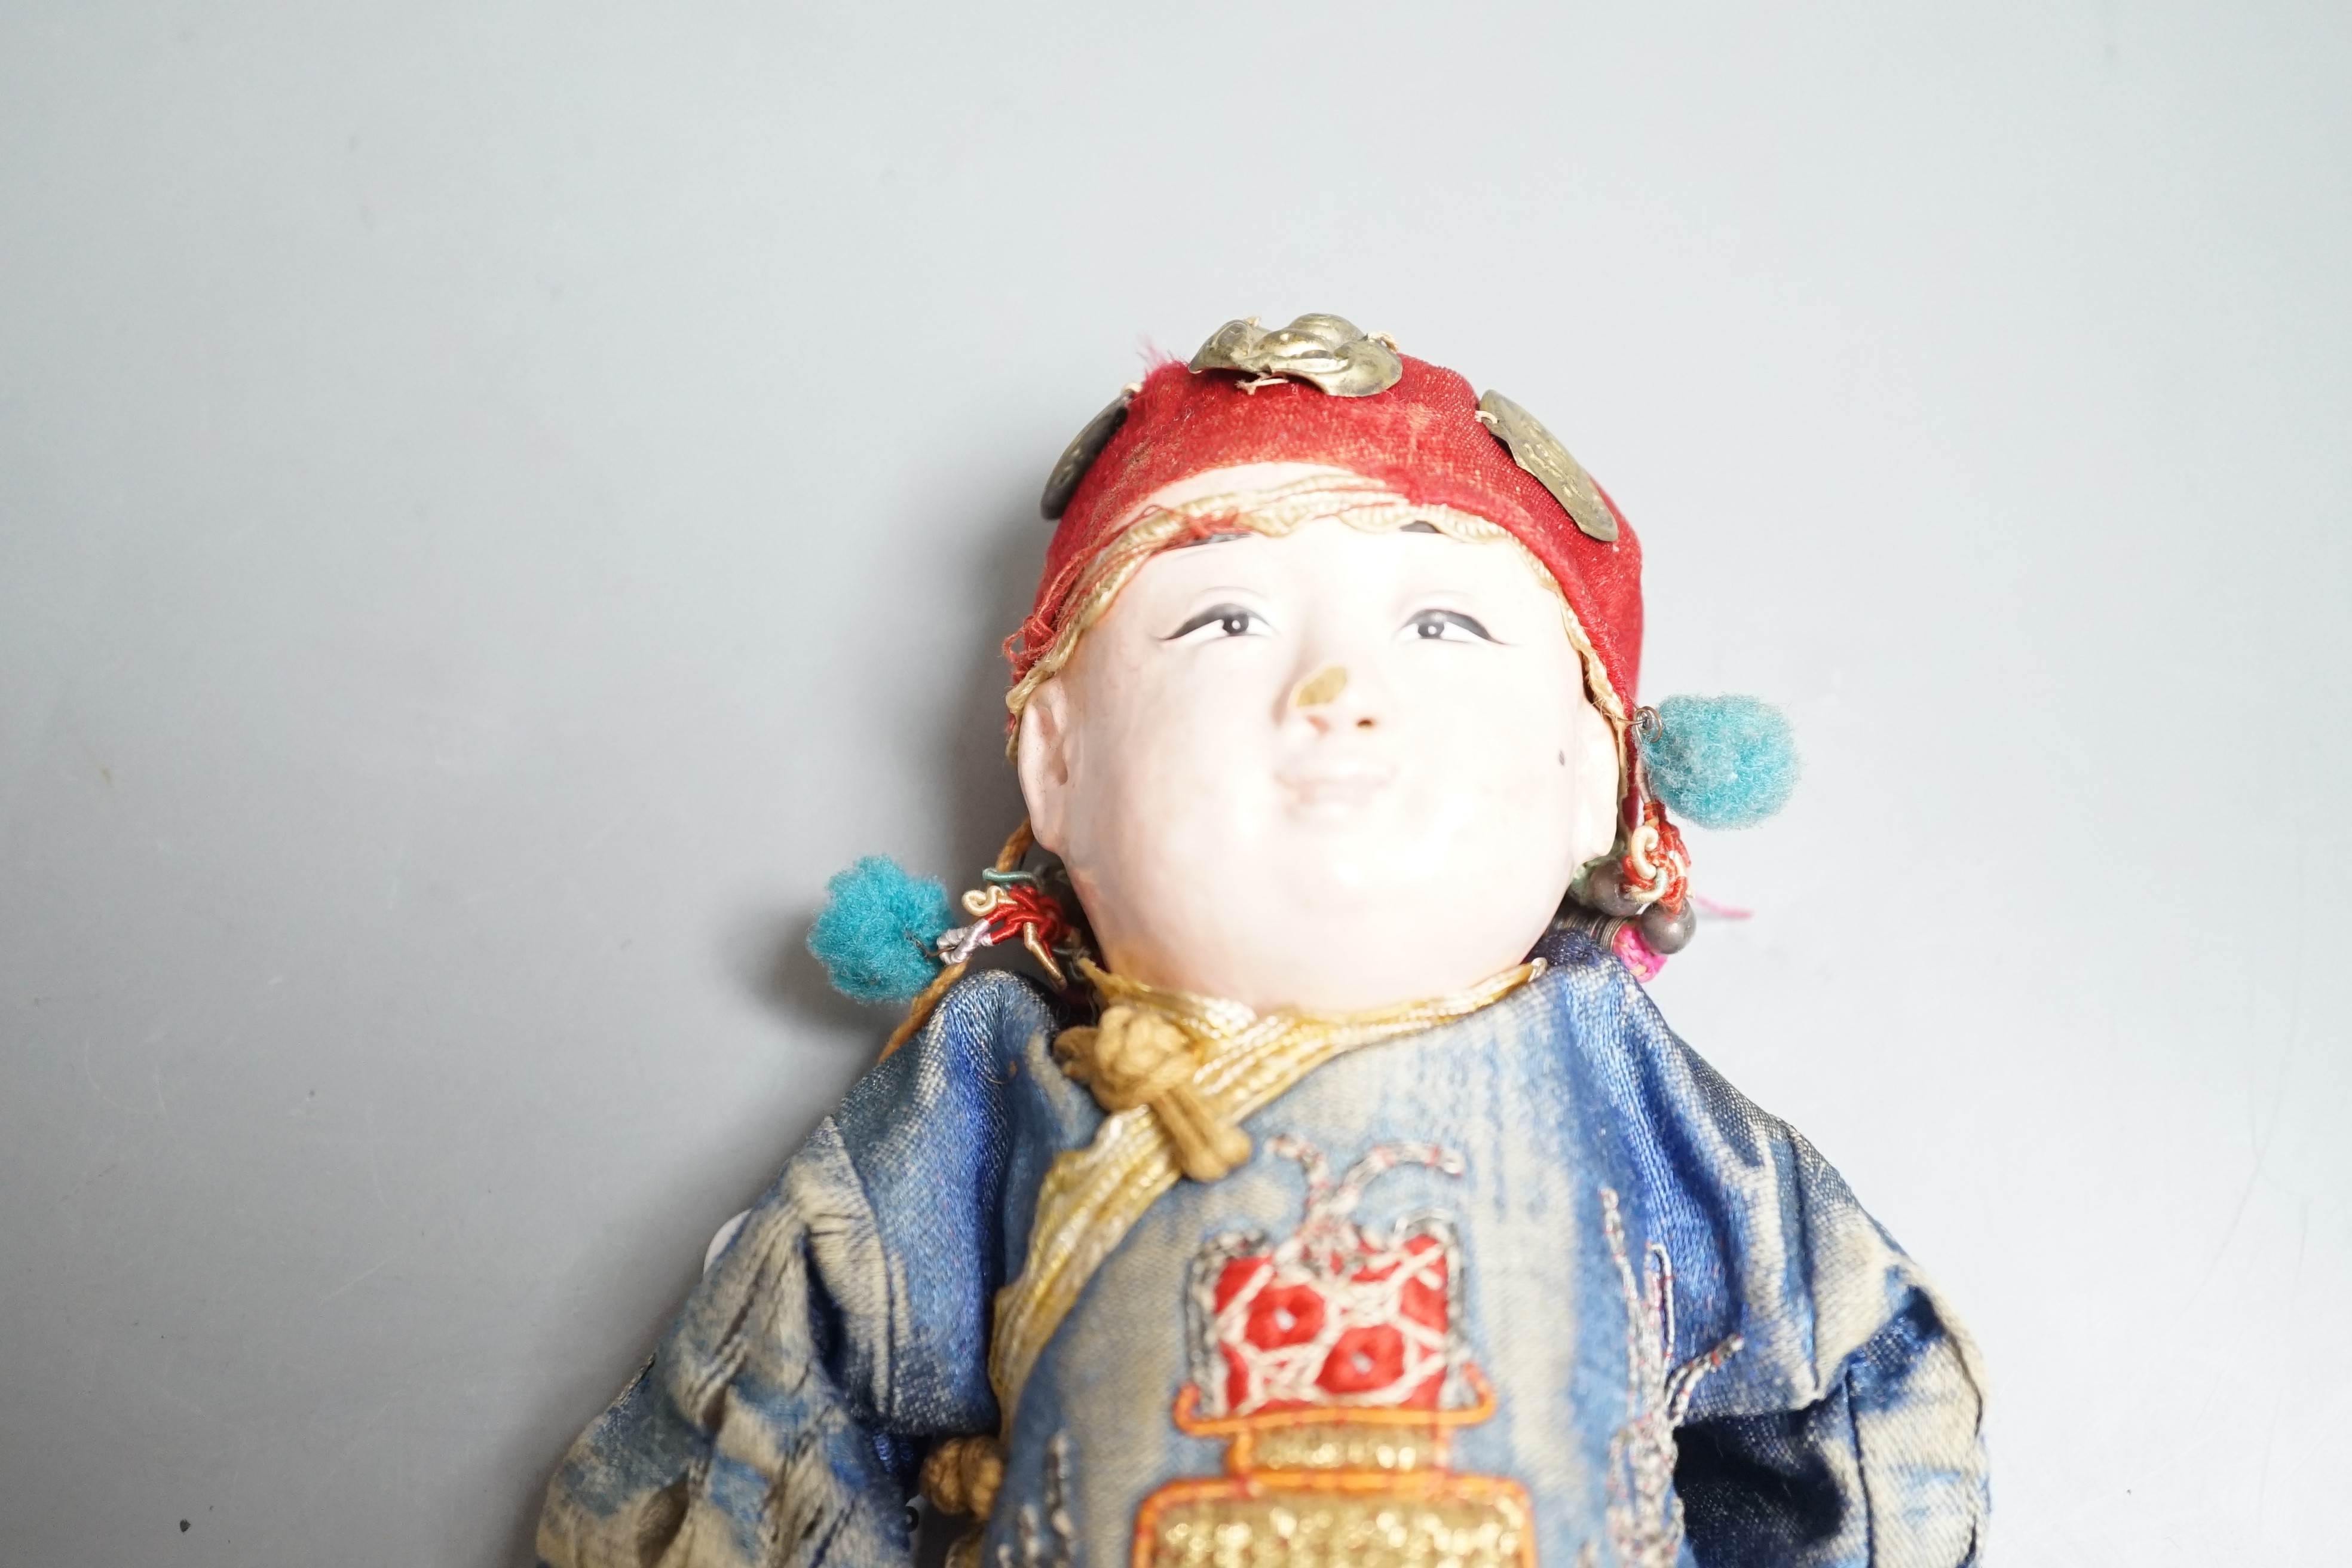 An early 20th century Chinese papier-mâché doll